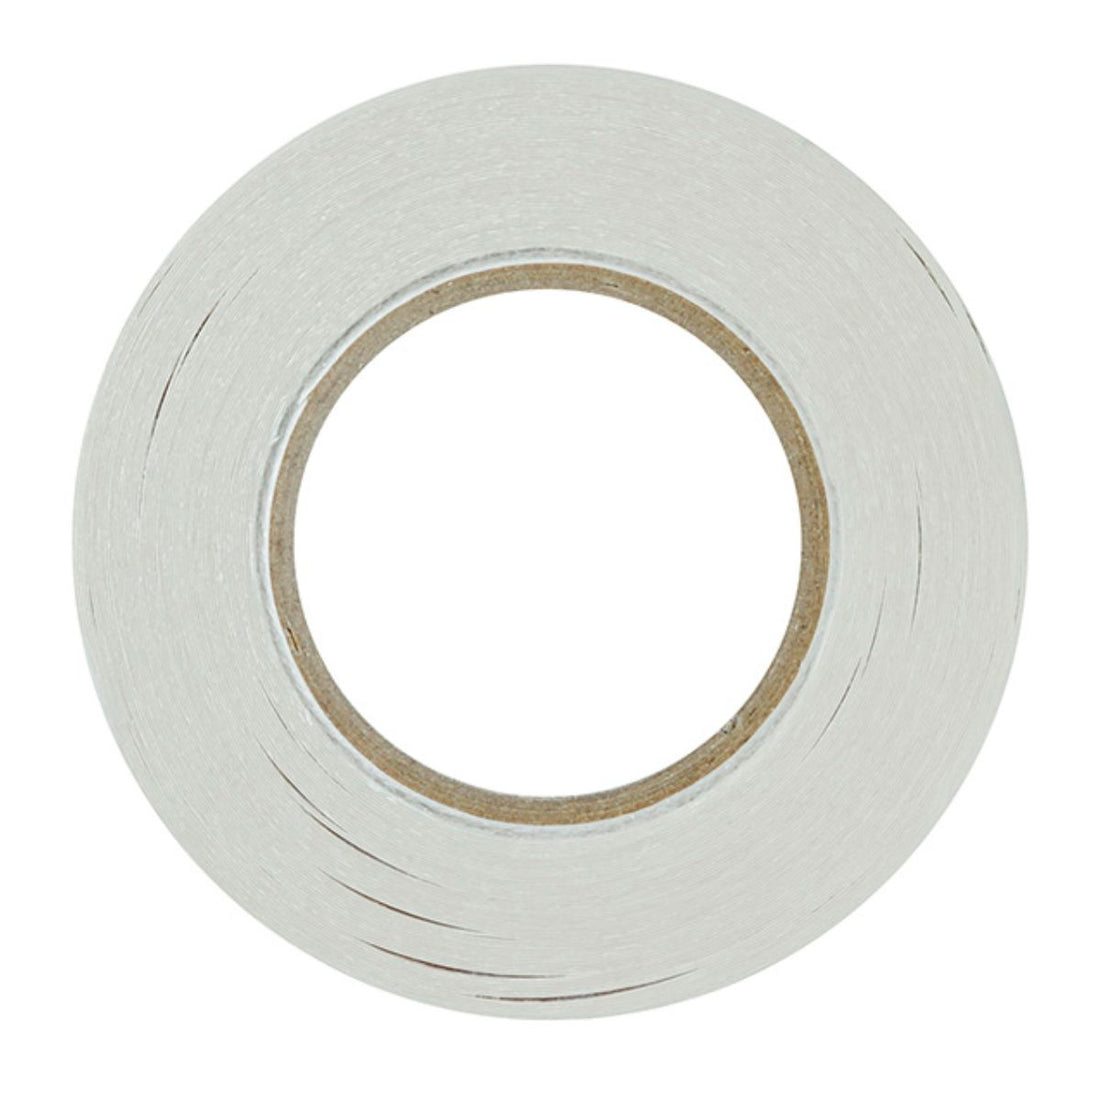 Clover Double Sided Basting Tape 12mm x 7m